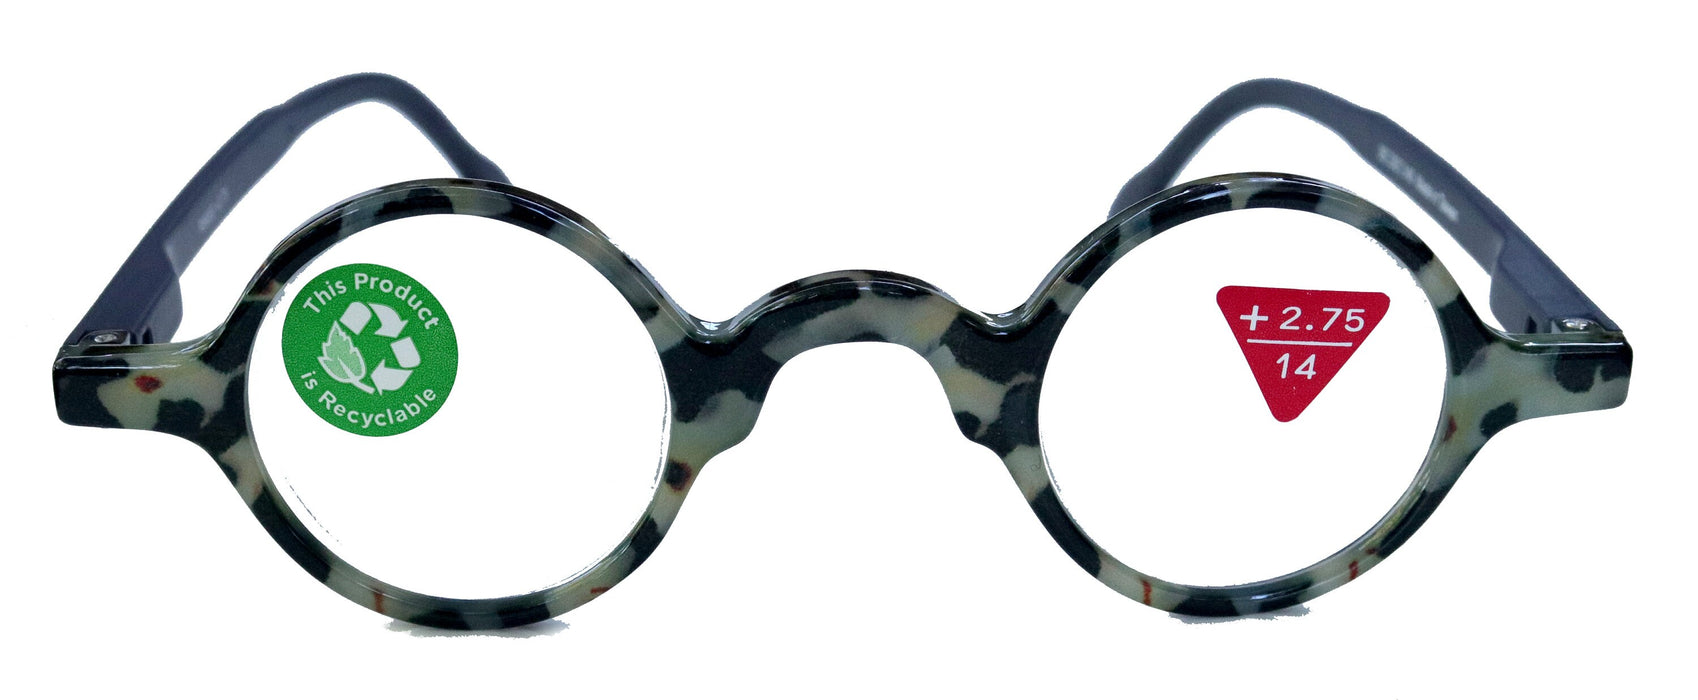 Picasso, (Premium) Reading Glasses, High End Readers +1.25 to +3 Magnifying, Circle optical Frames. Round Tortoise (Black) NY Fifth Avenue.